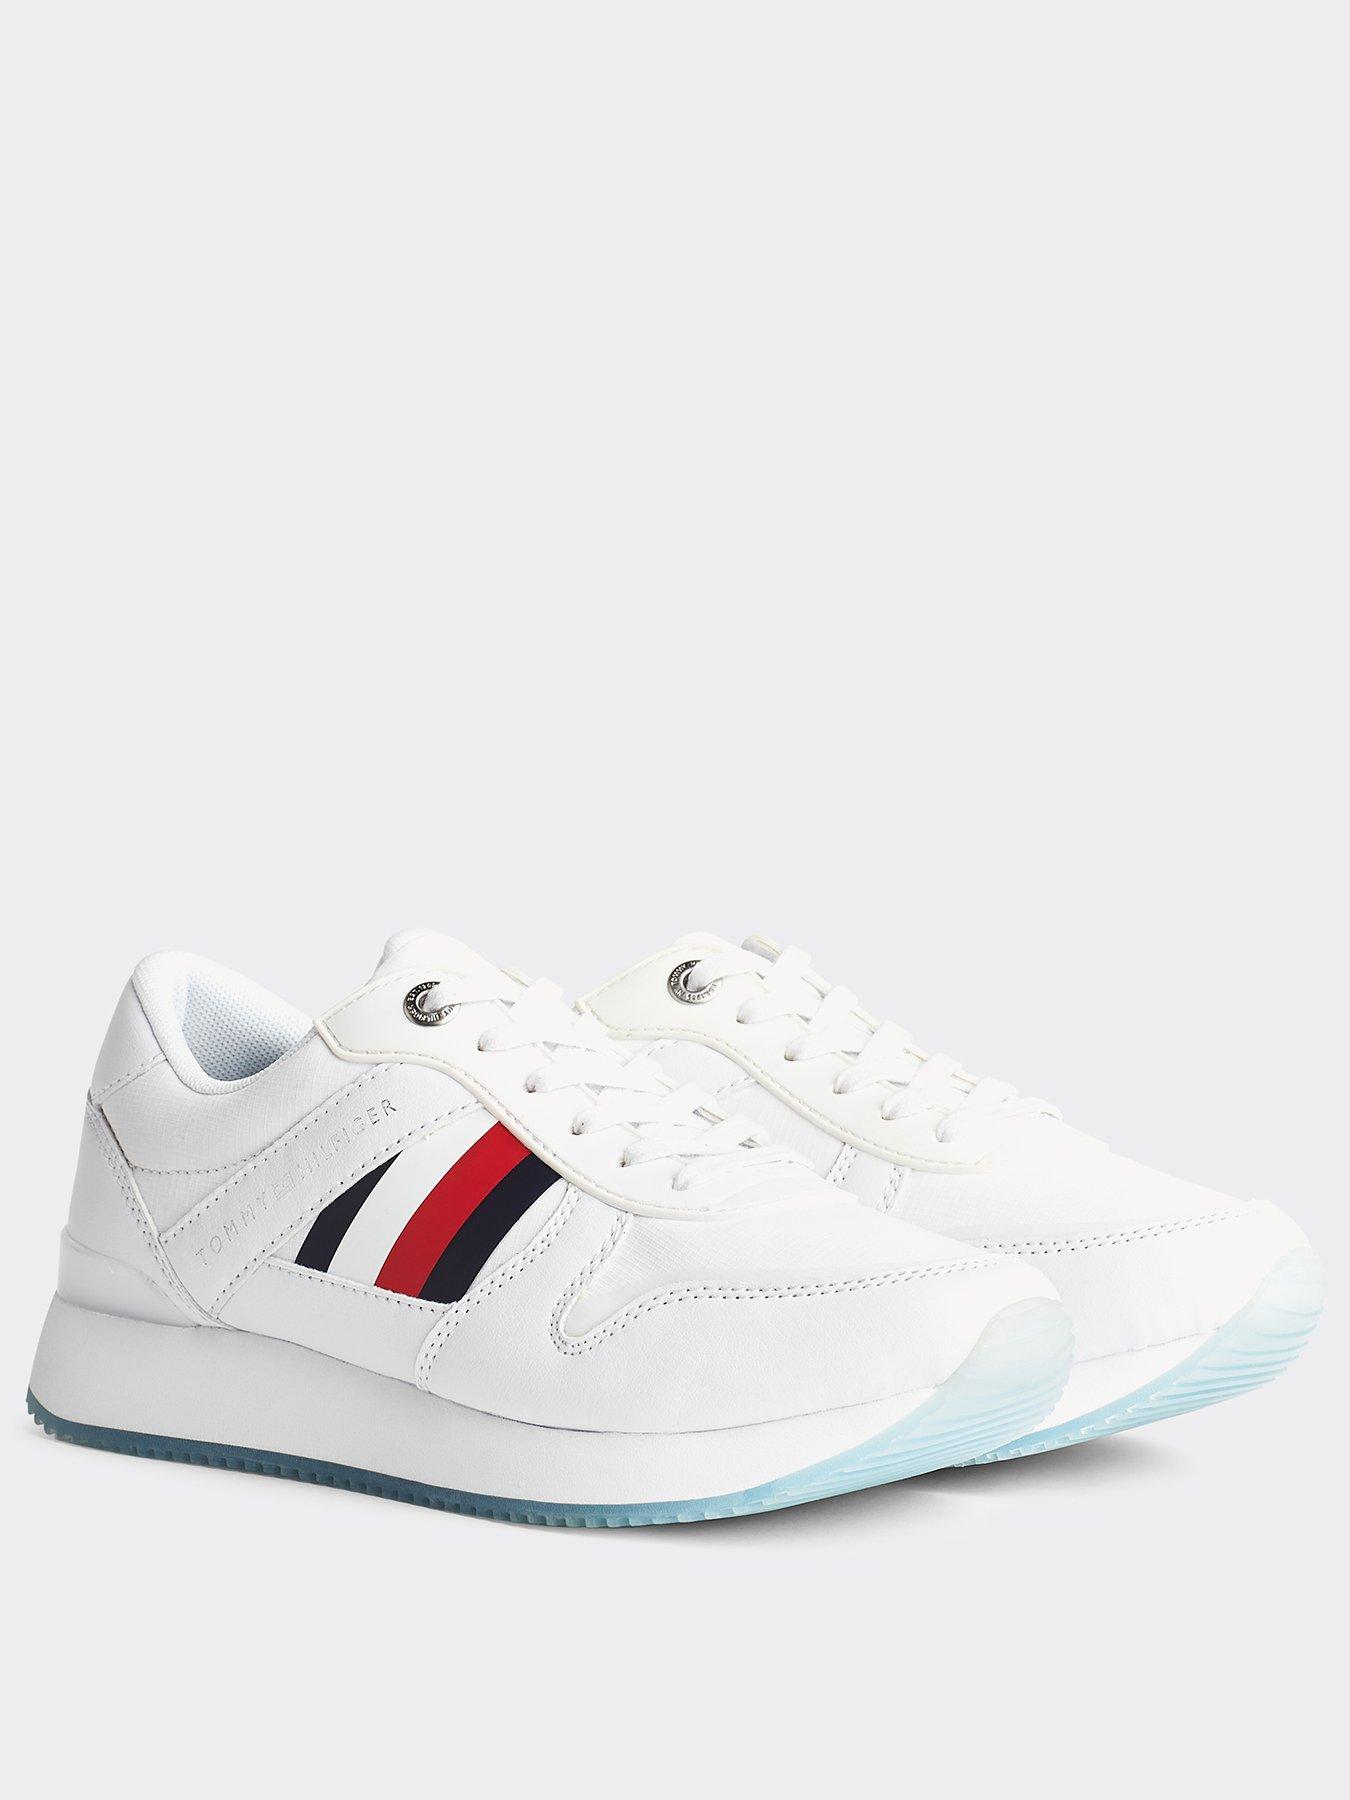 online shopping tommy hilfiger canada